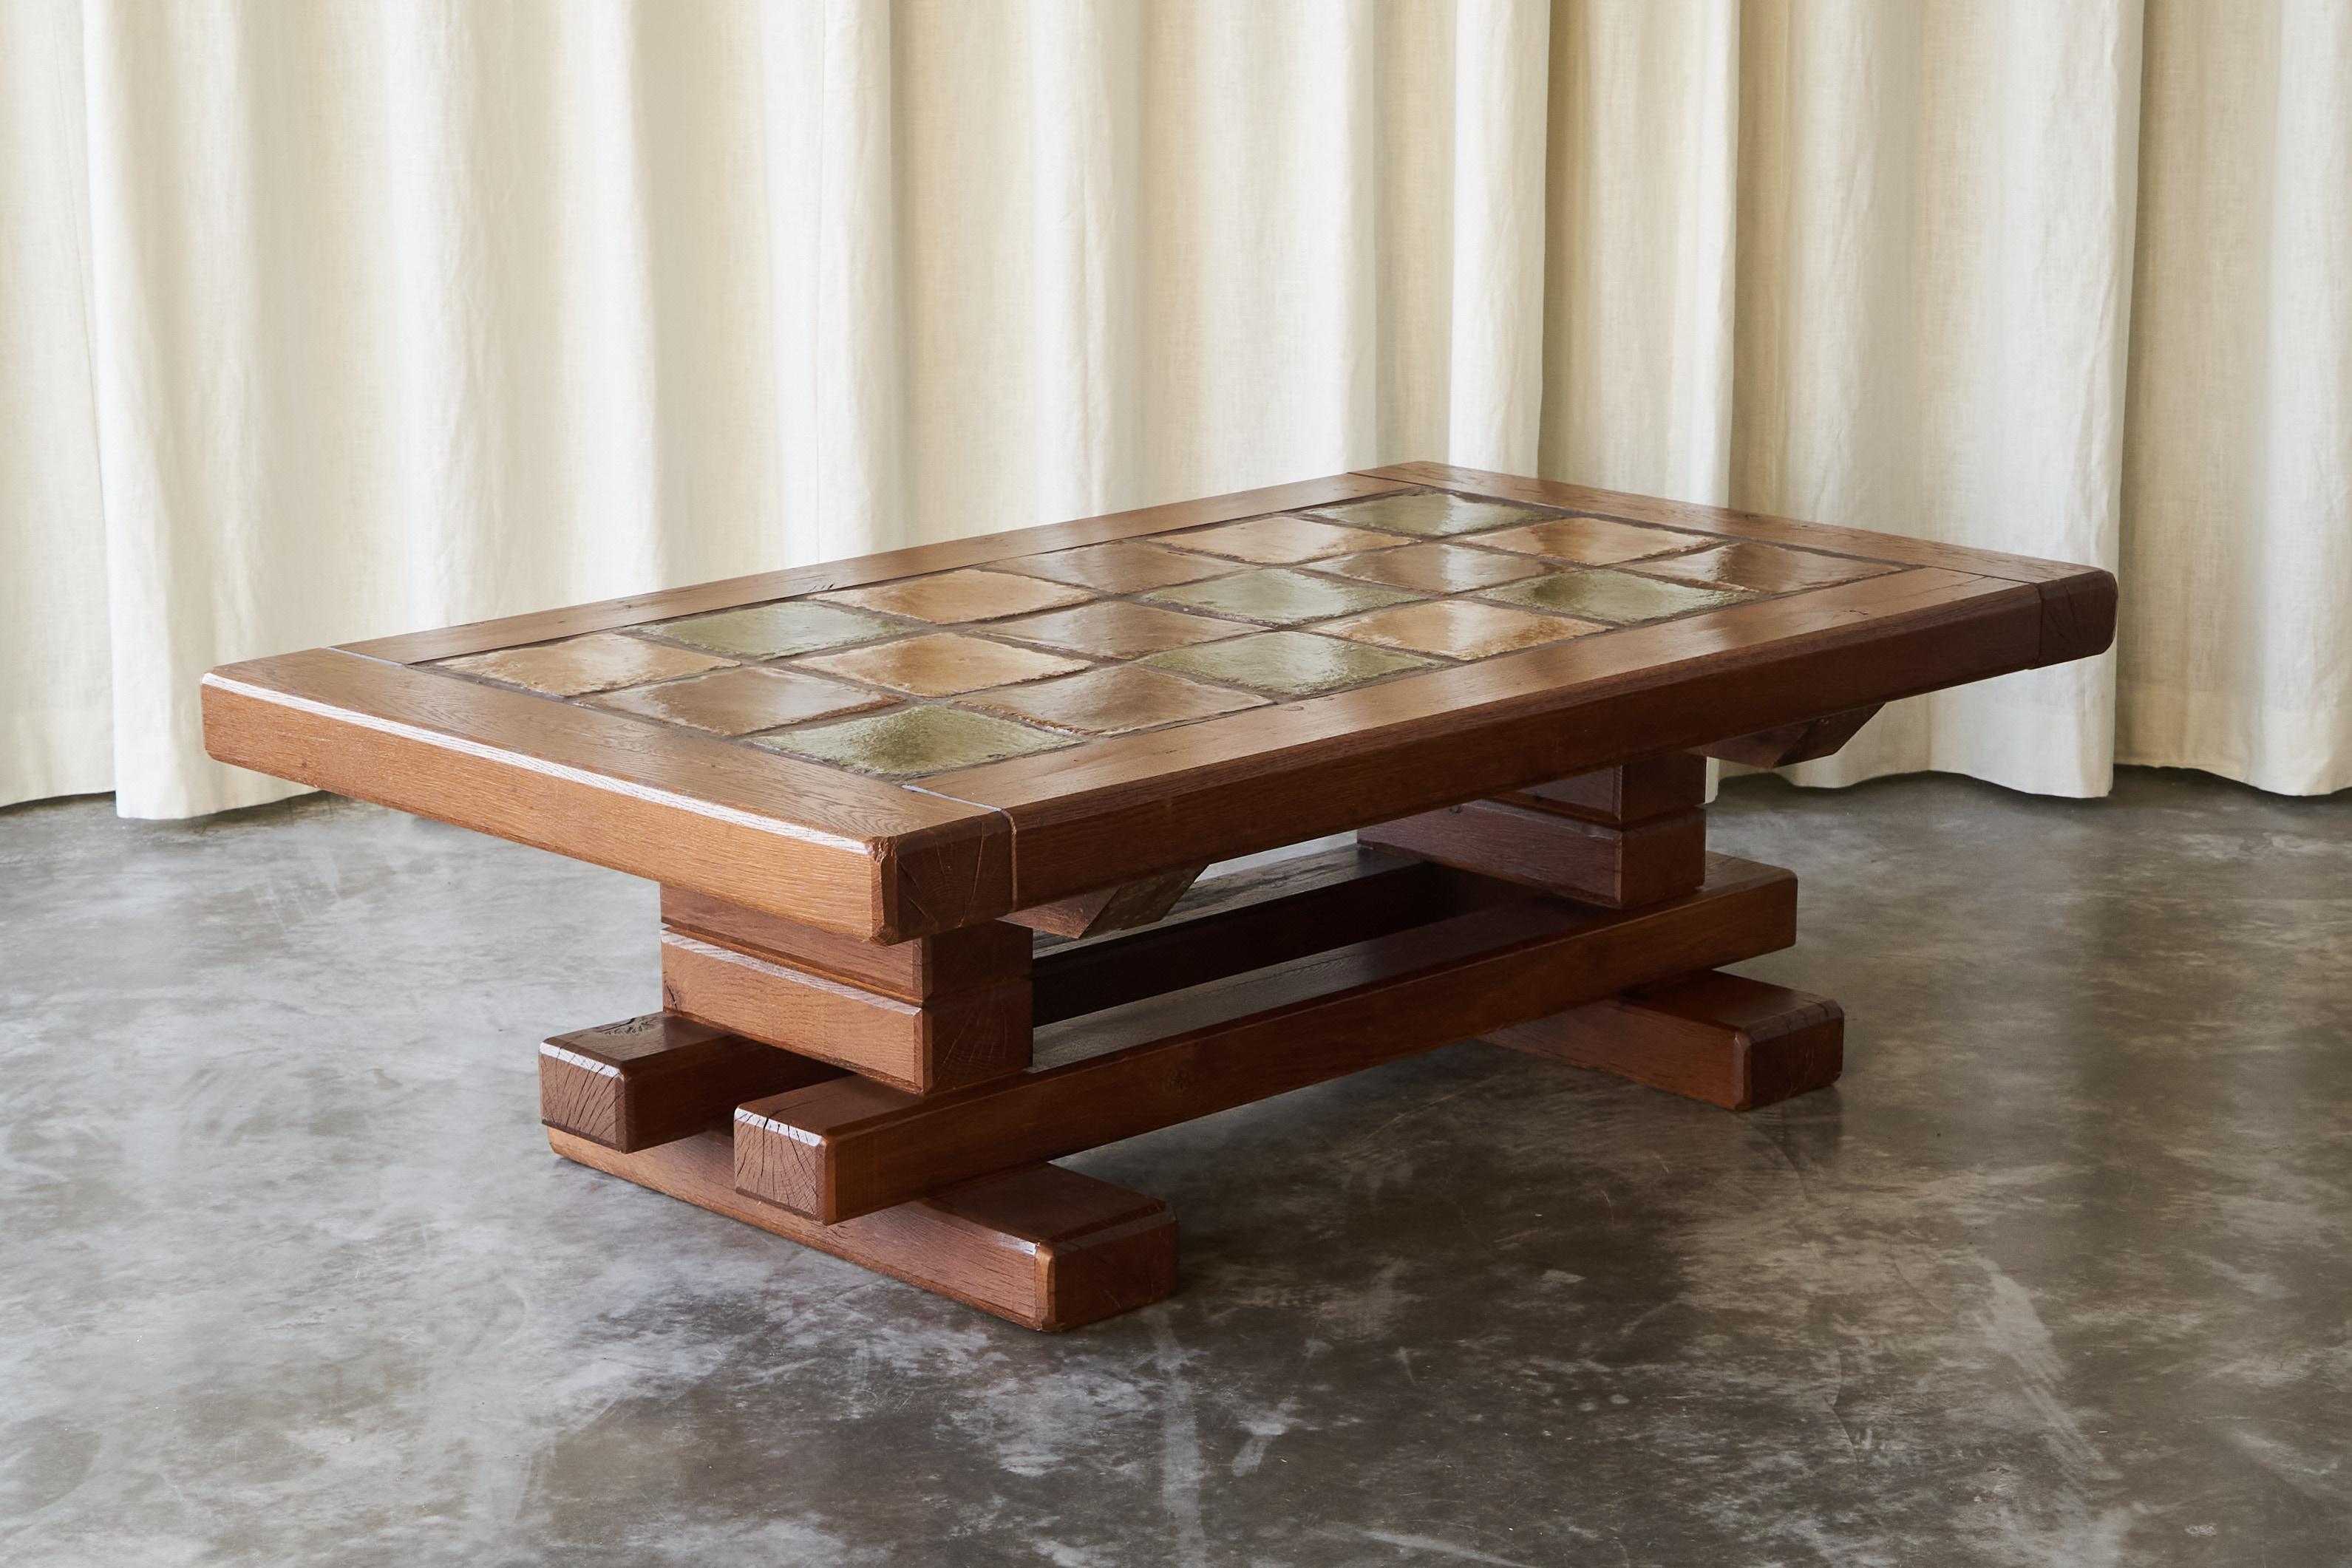 Mid-Century Modern Constructivist Coffee Table in Solid Oak and Ceramic 1960s For Sale